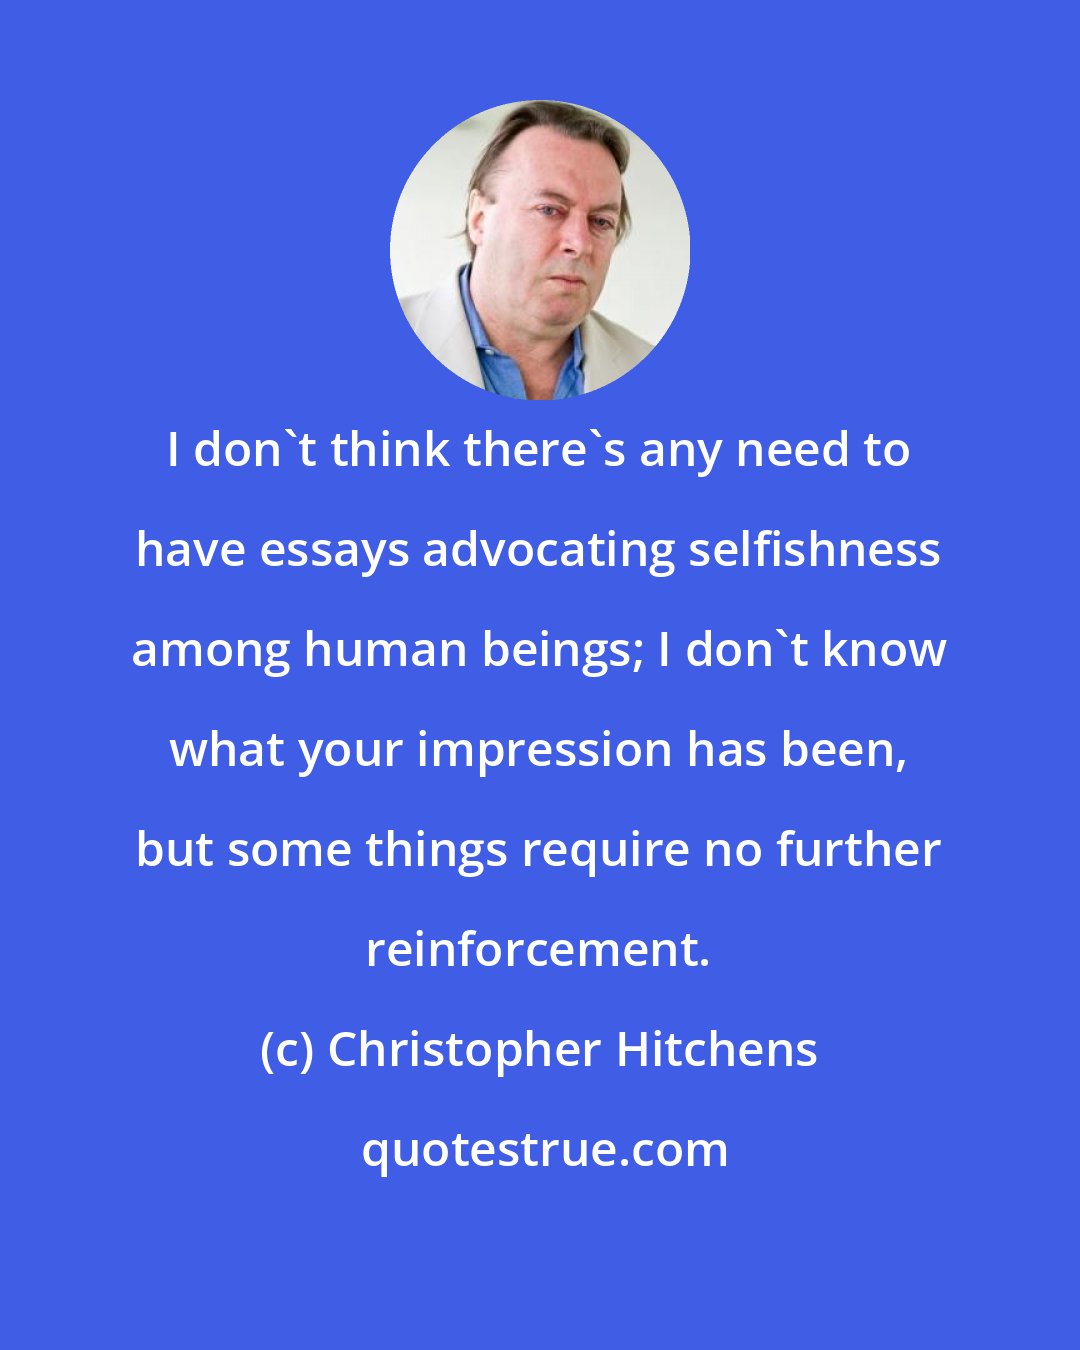 Christopher Hitchens: I don't think there's any need to have essays advocating selfishness among human beings; I don't know what your impression has been, but some things require no further reinforcement.